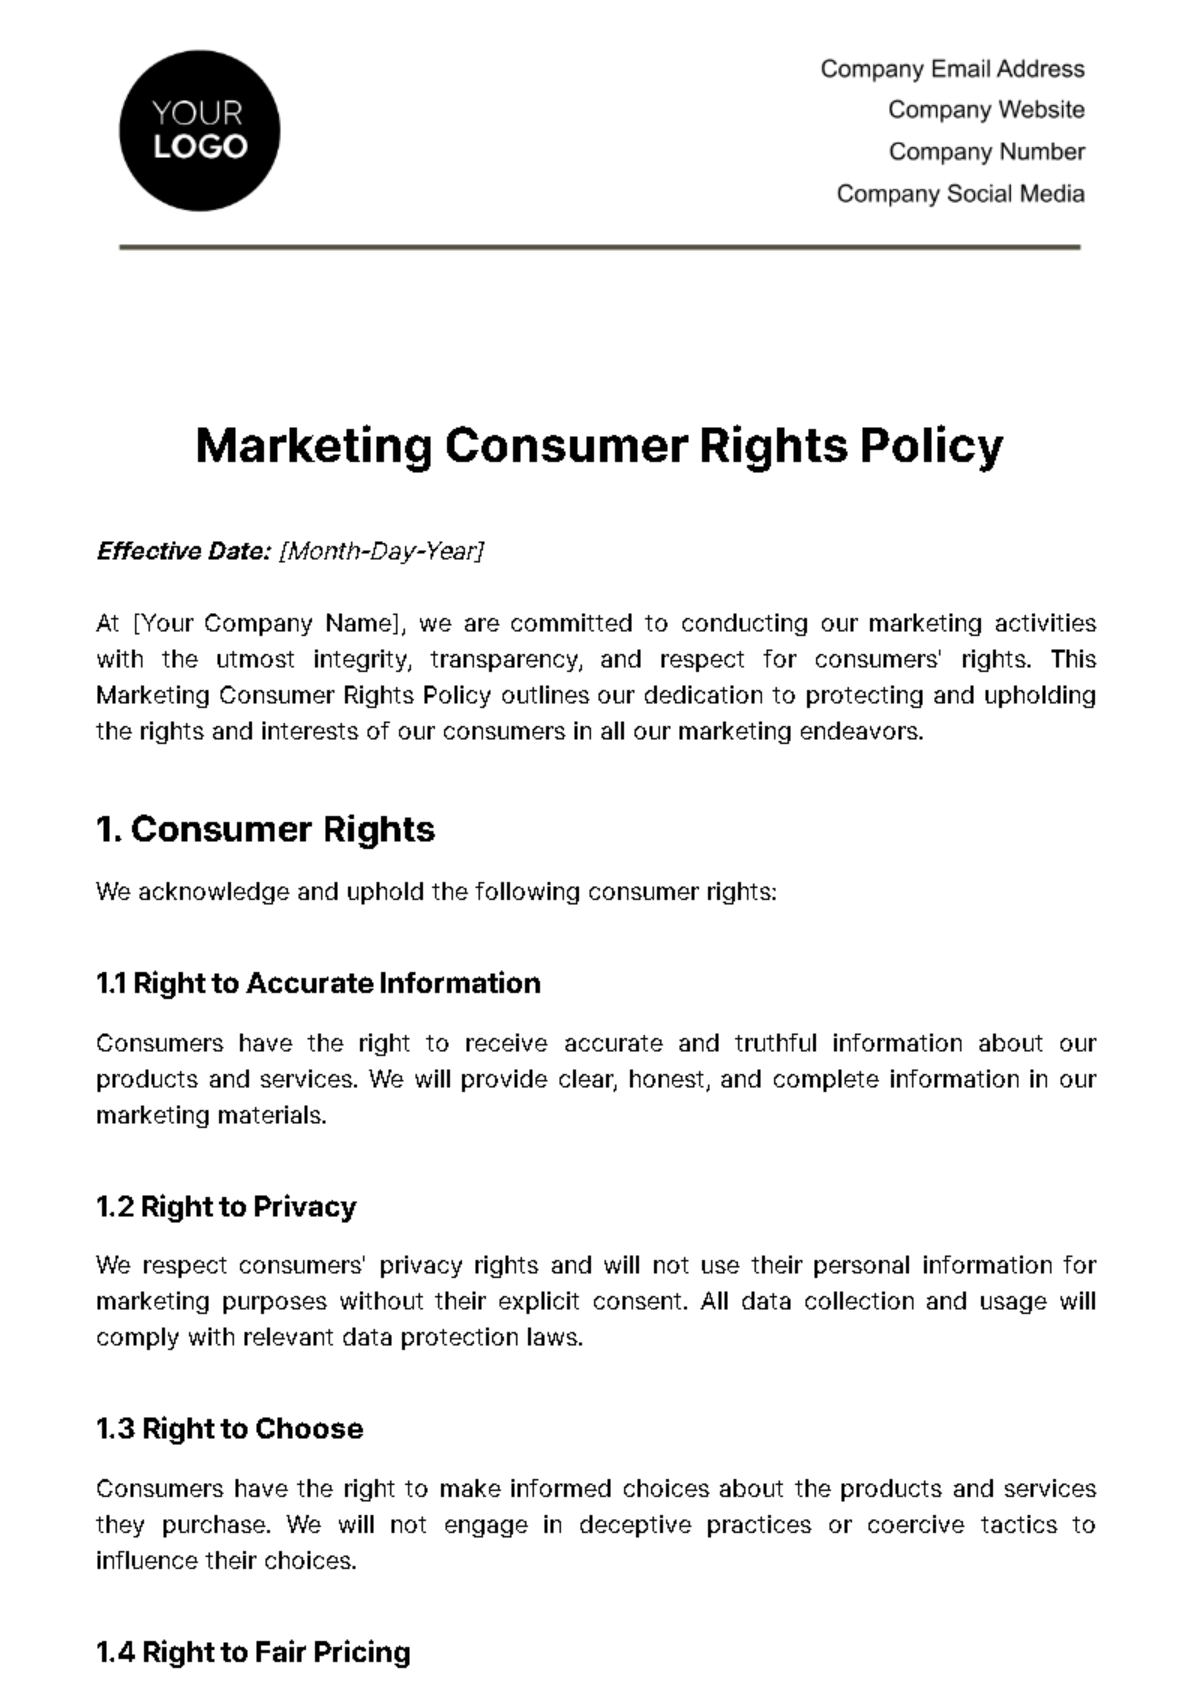 Free Marketing Consumer Rights Policy Template